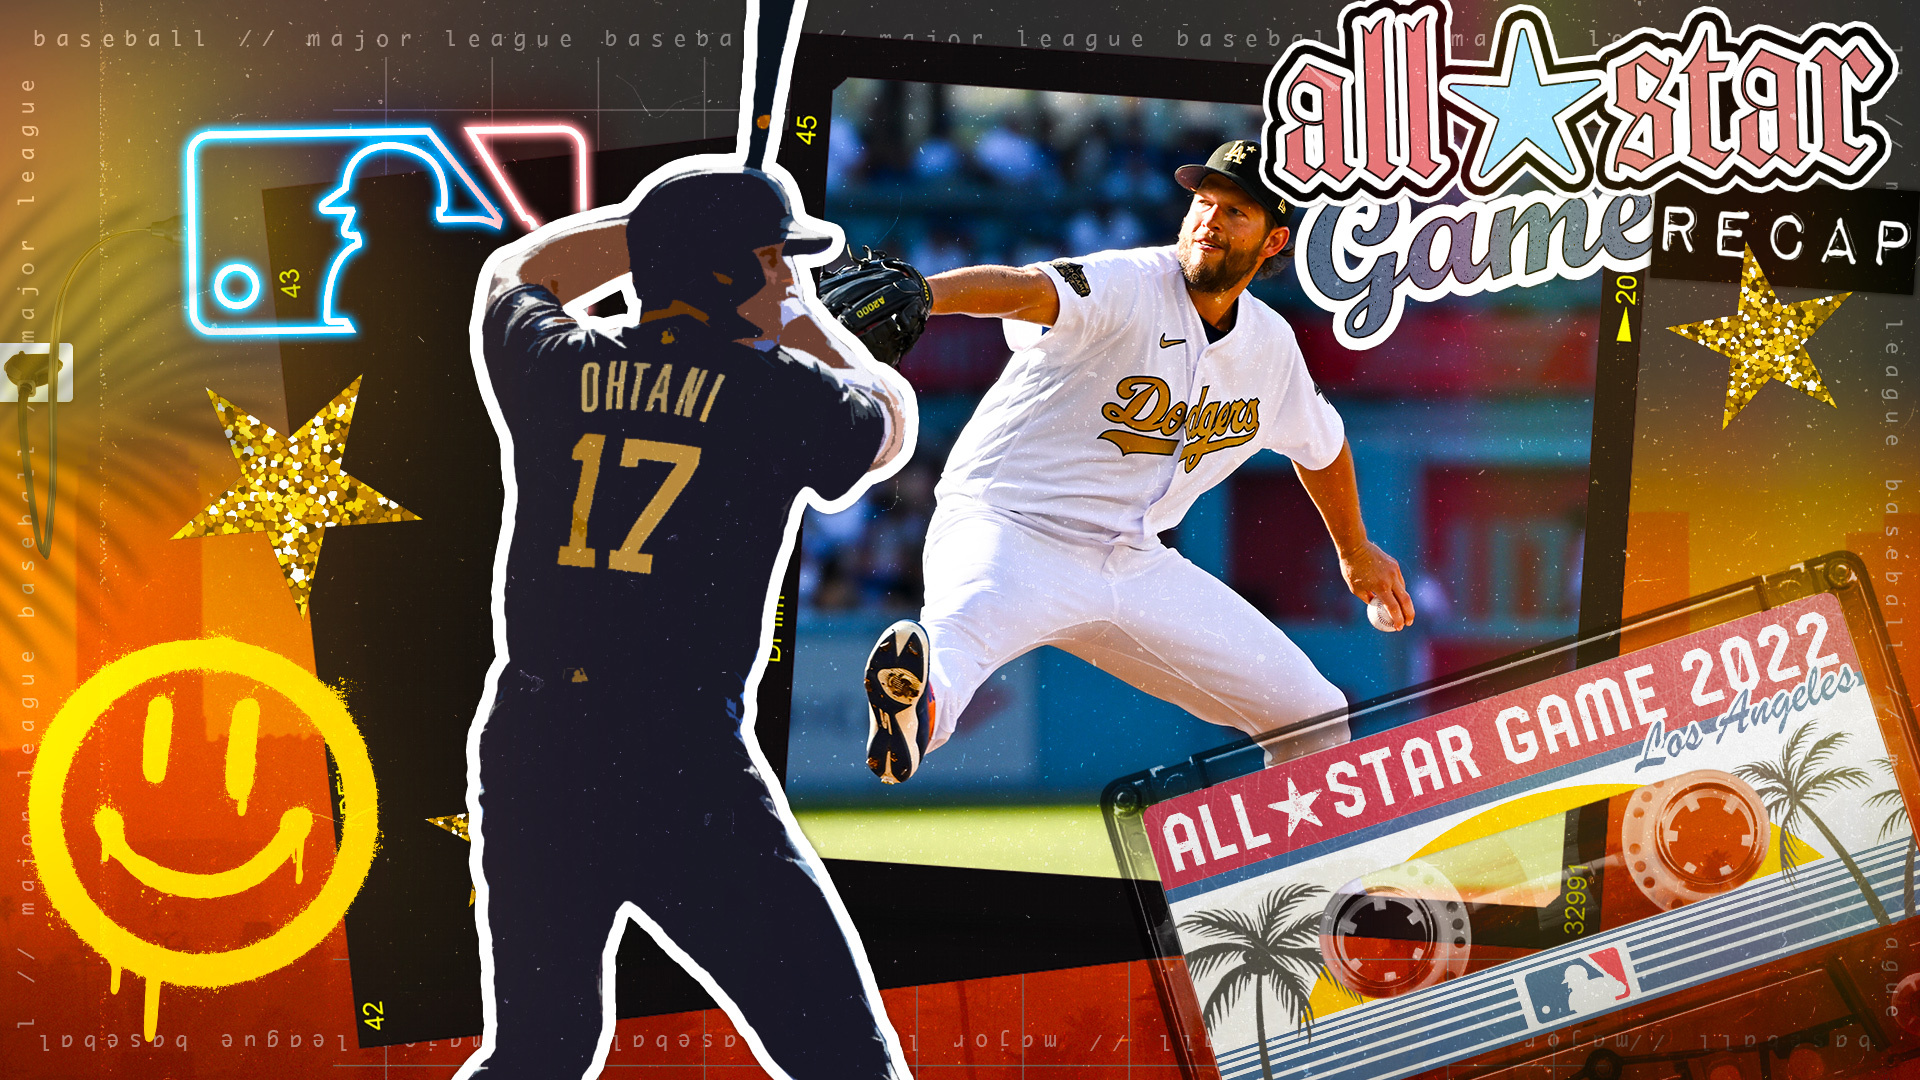 2022 MLB All-Star Game results: American League defeats Nationals